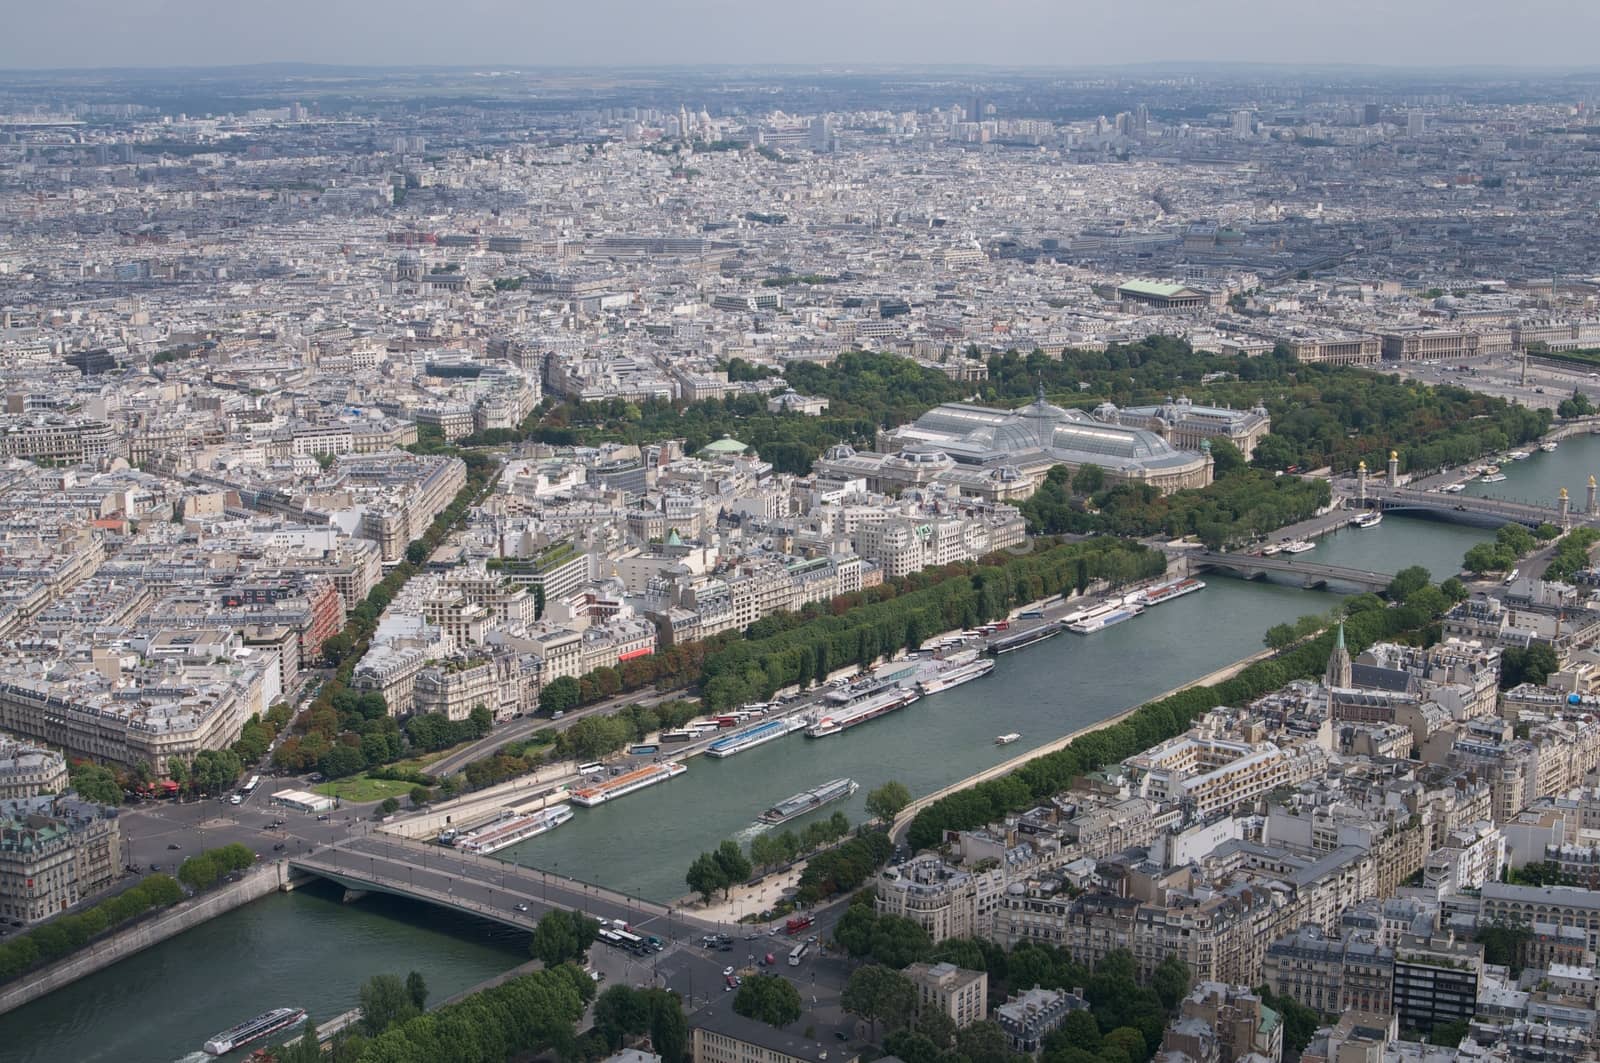 From the Eifel tower by dyvan